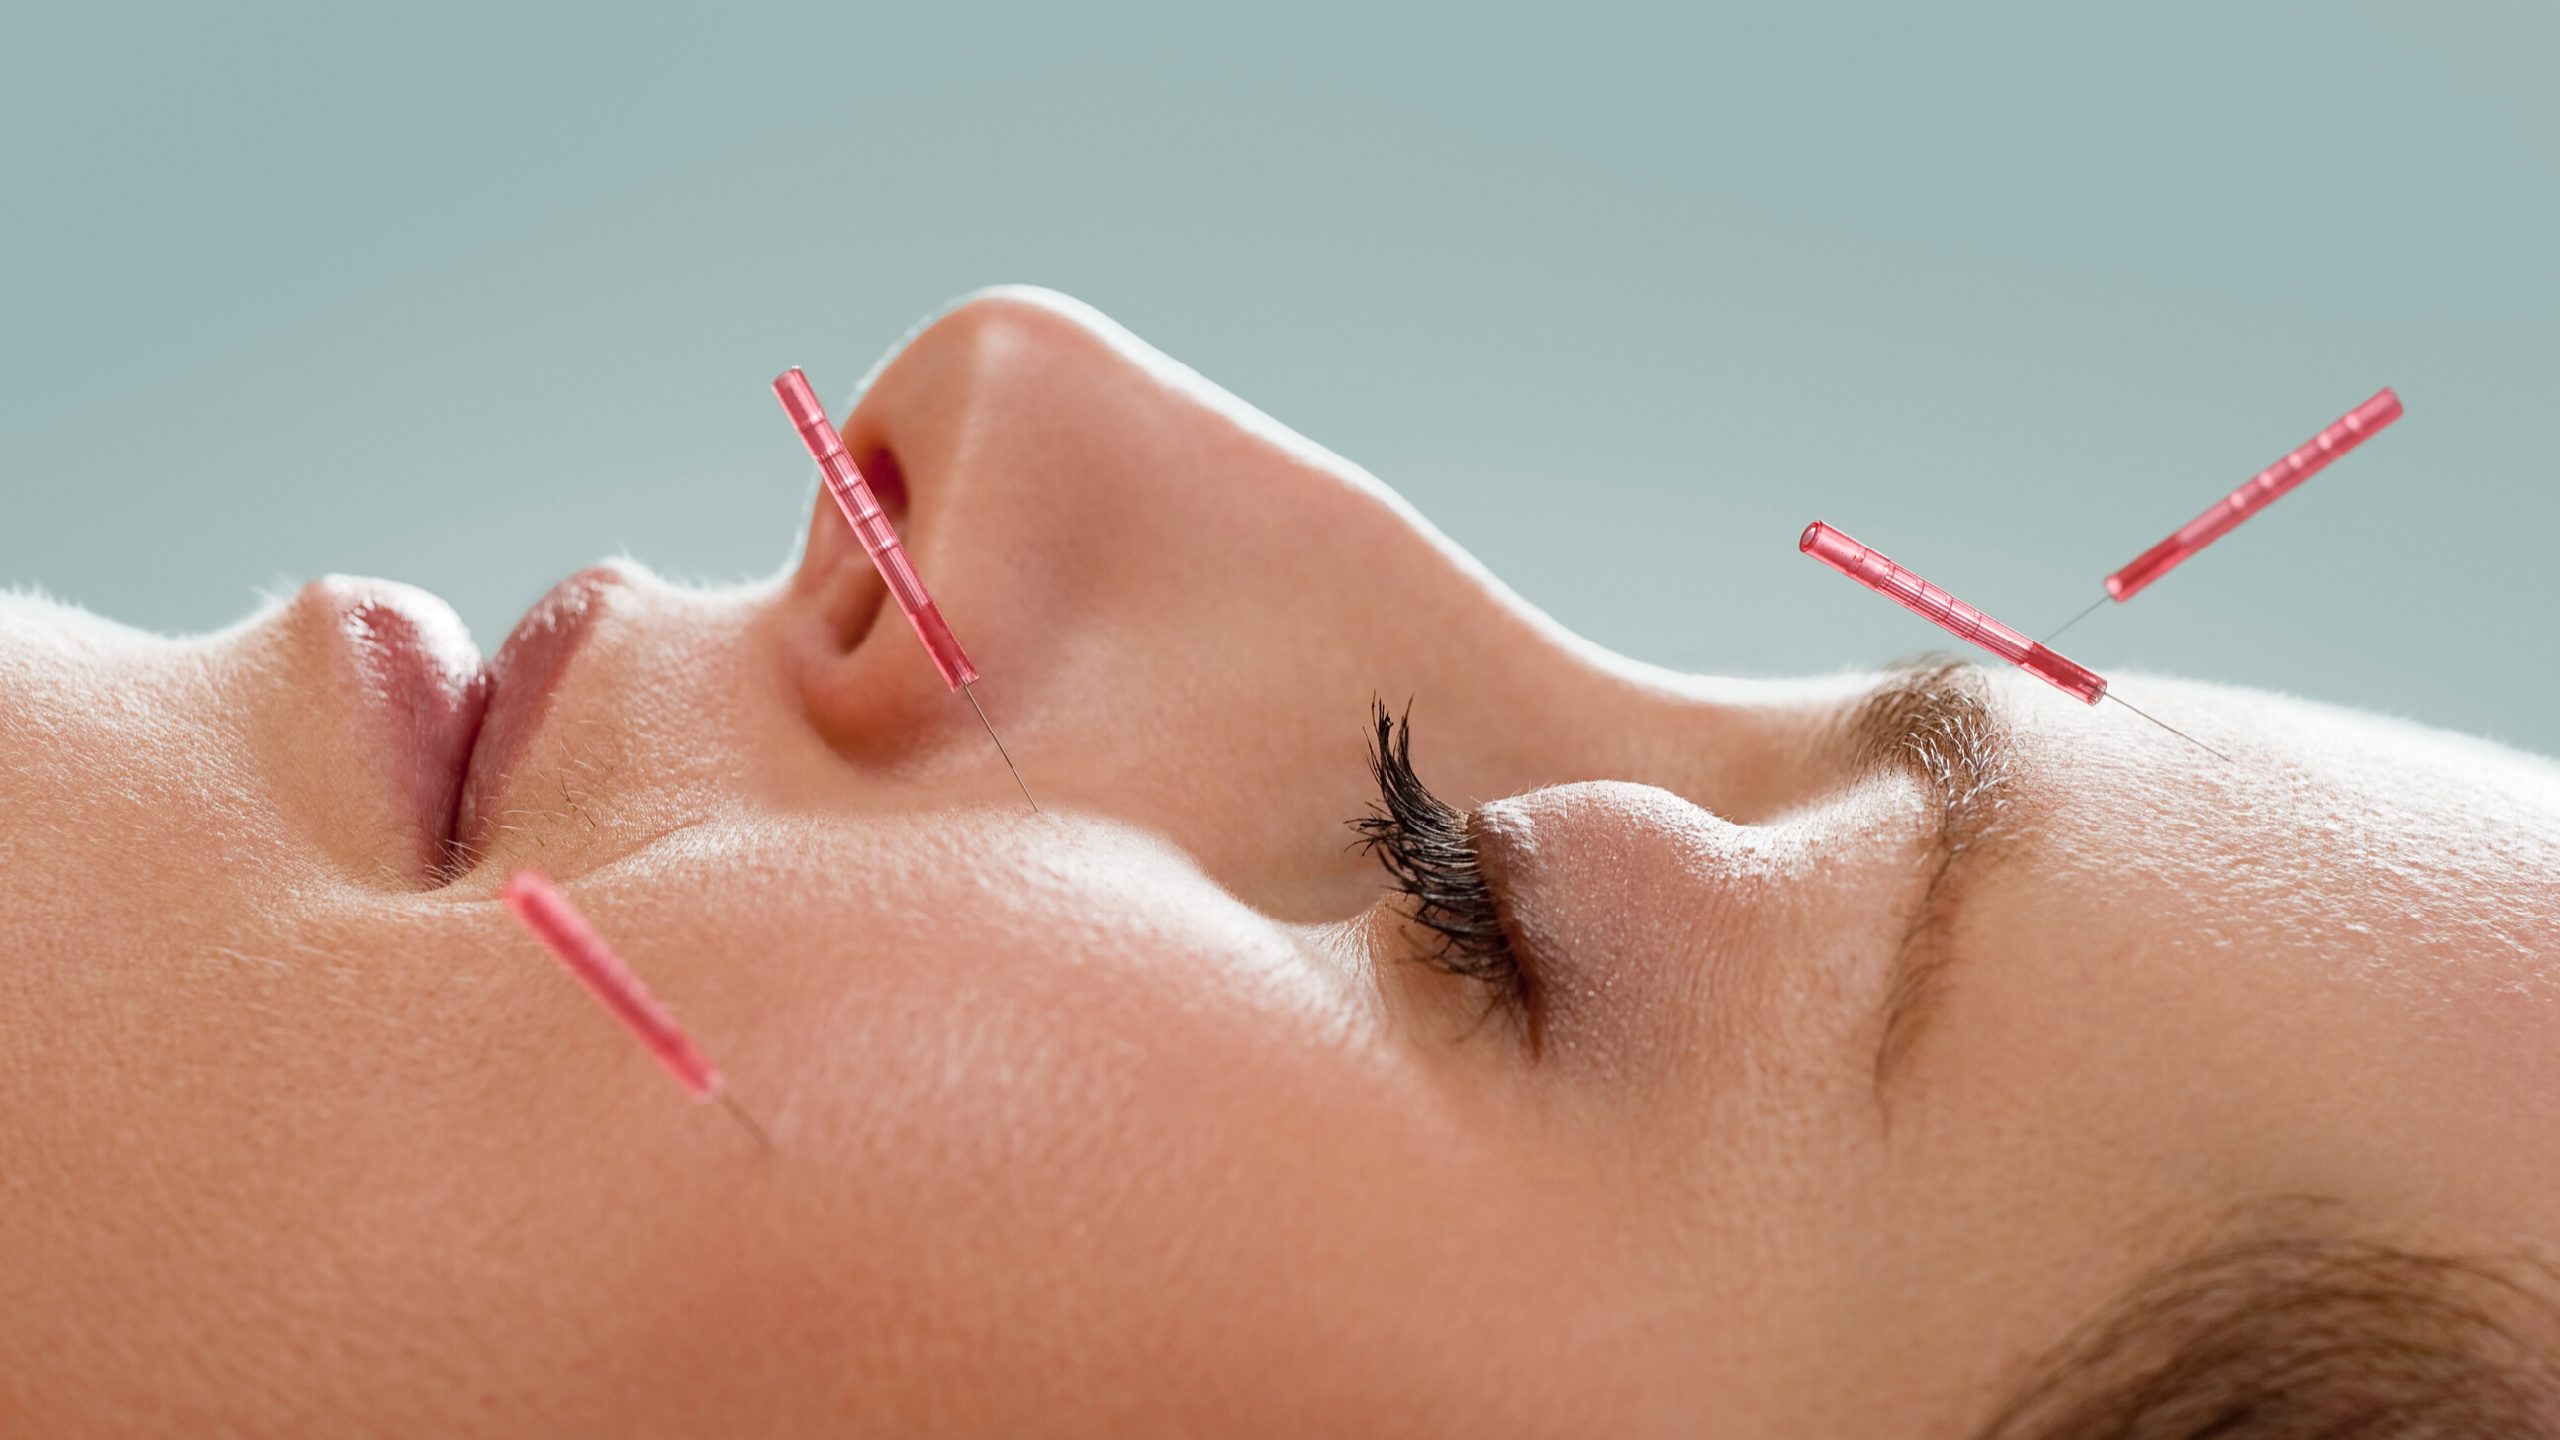 Close up of woman's face receiving facial acupuncture treatment with .5mm Seirin red acupuncture needles.